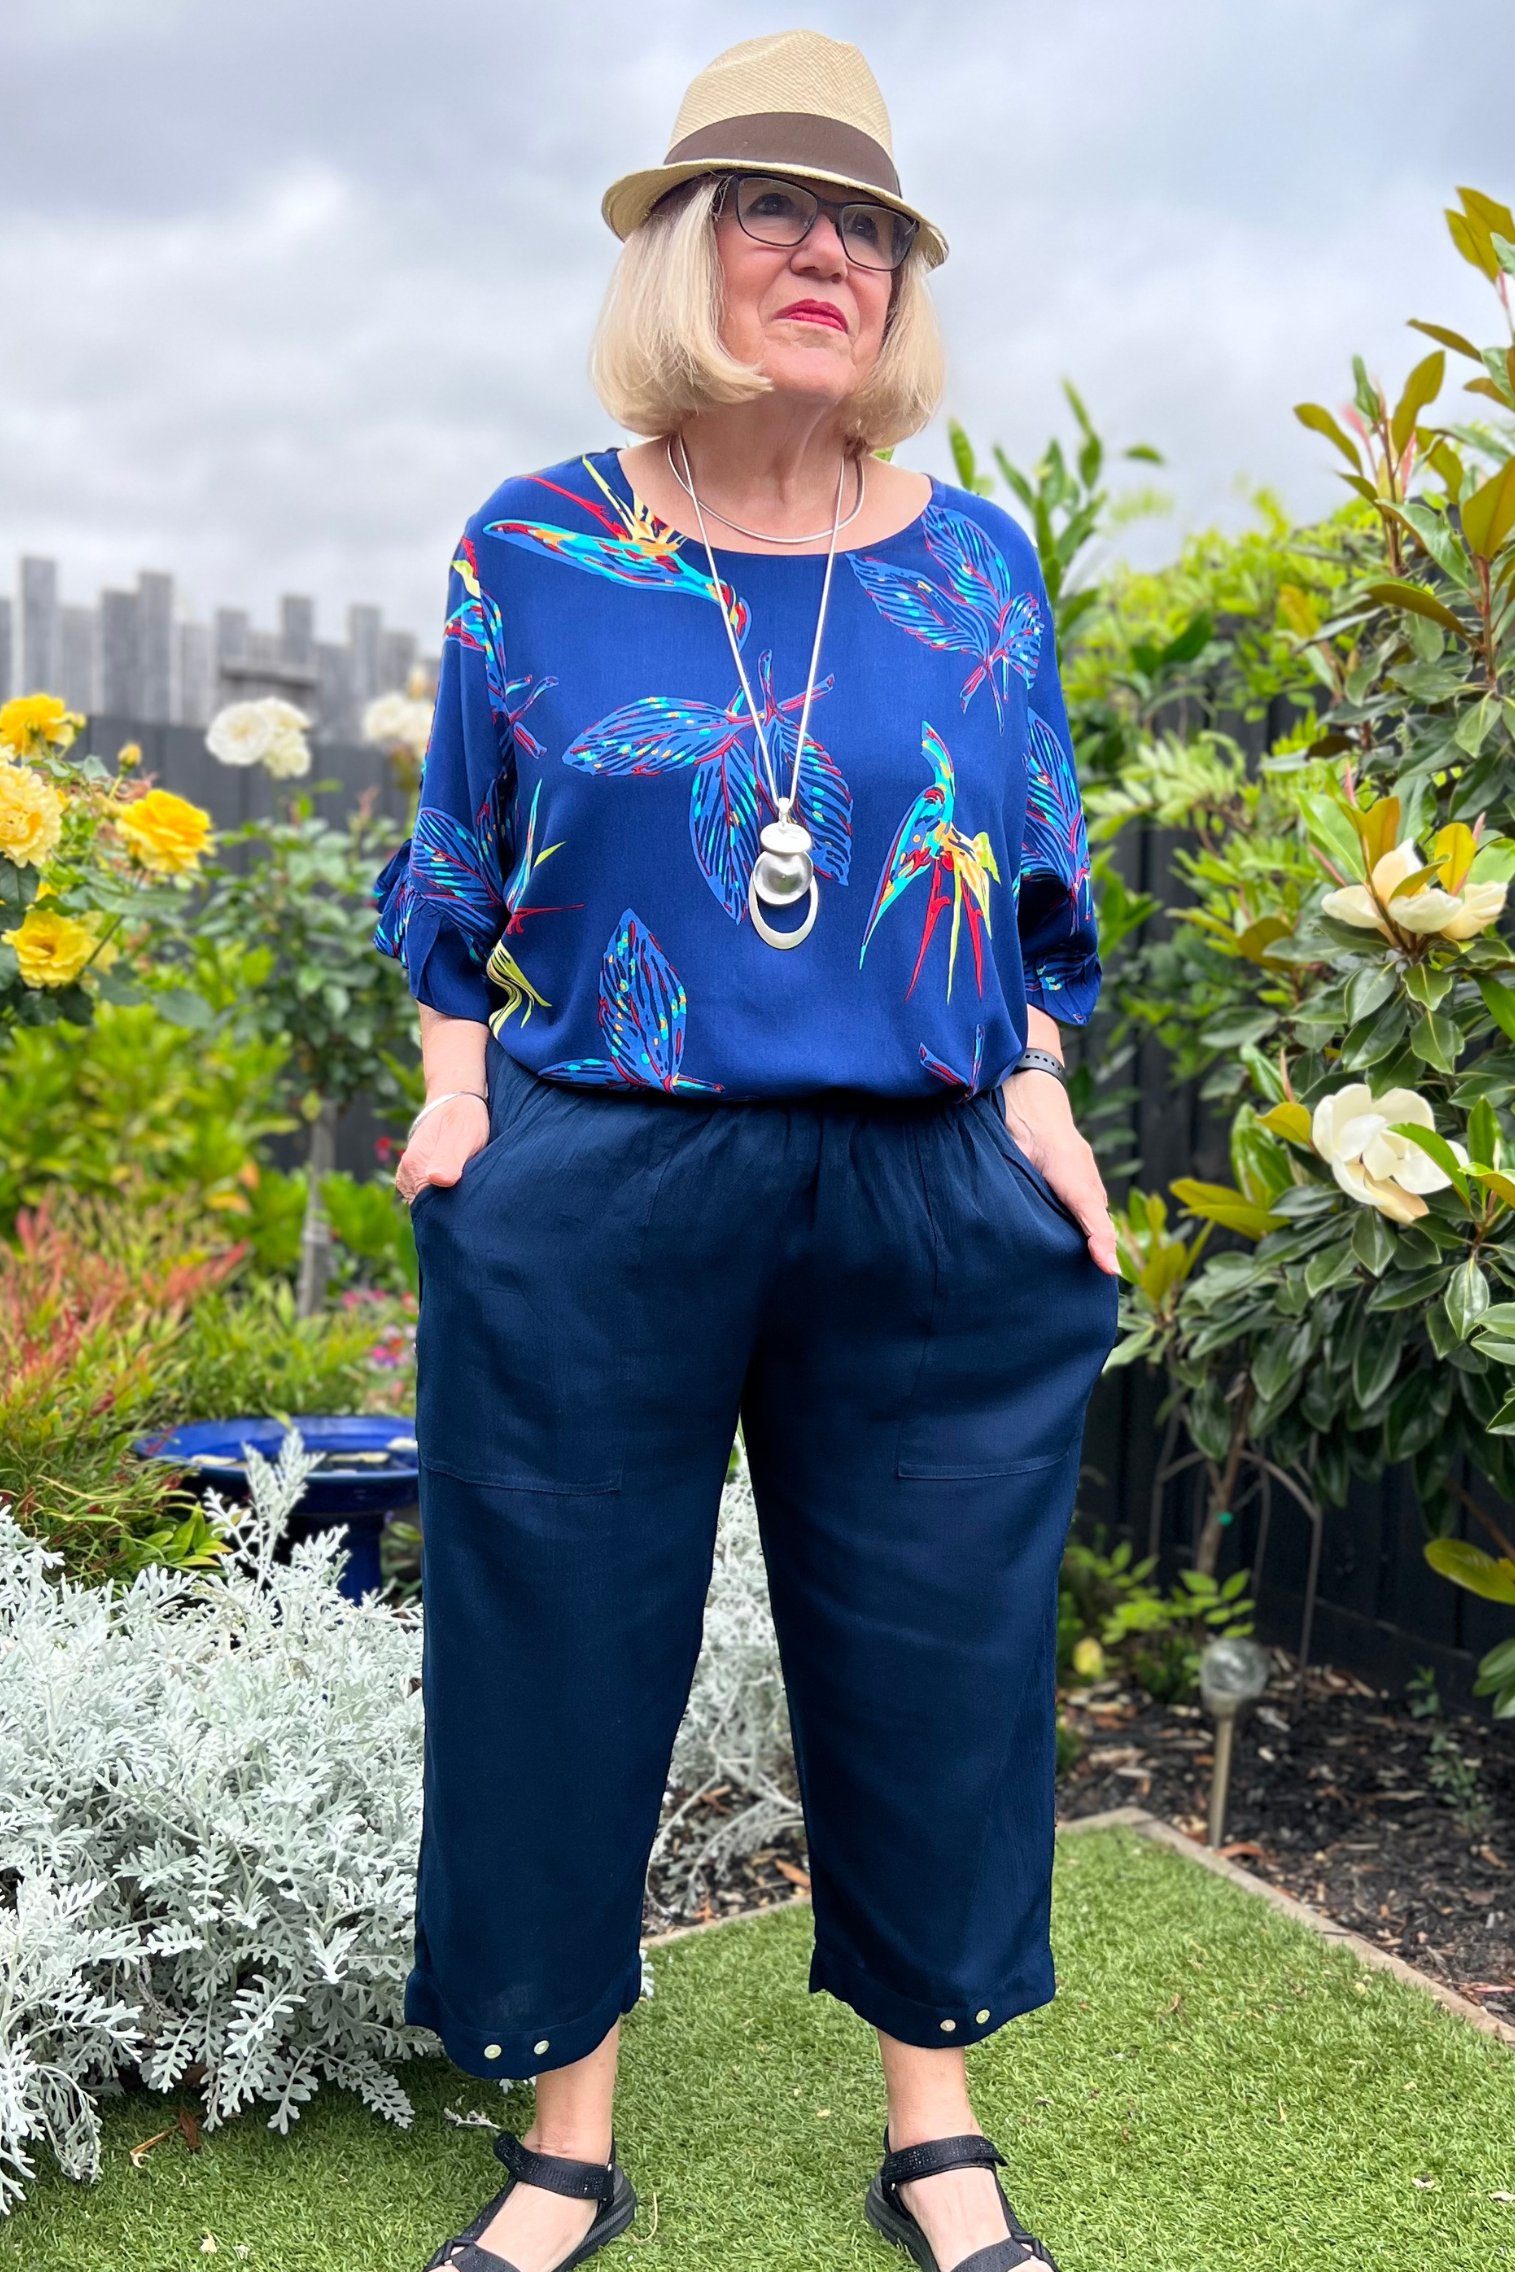 Kita Ku modelling a pant Sita in navy with button trim on the hem, also with a top Zara set in a sunny garden.